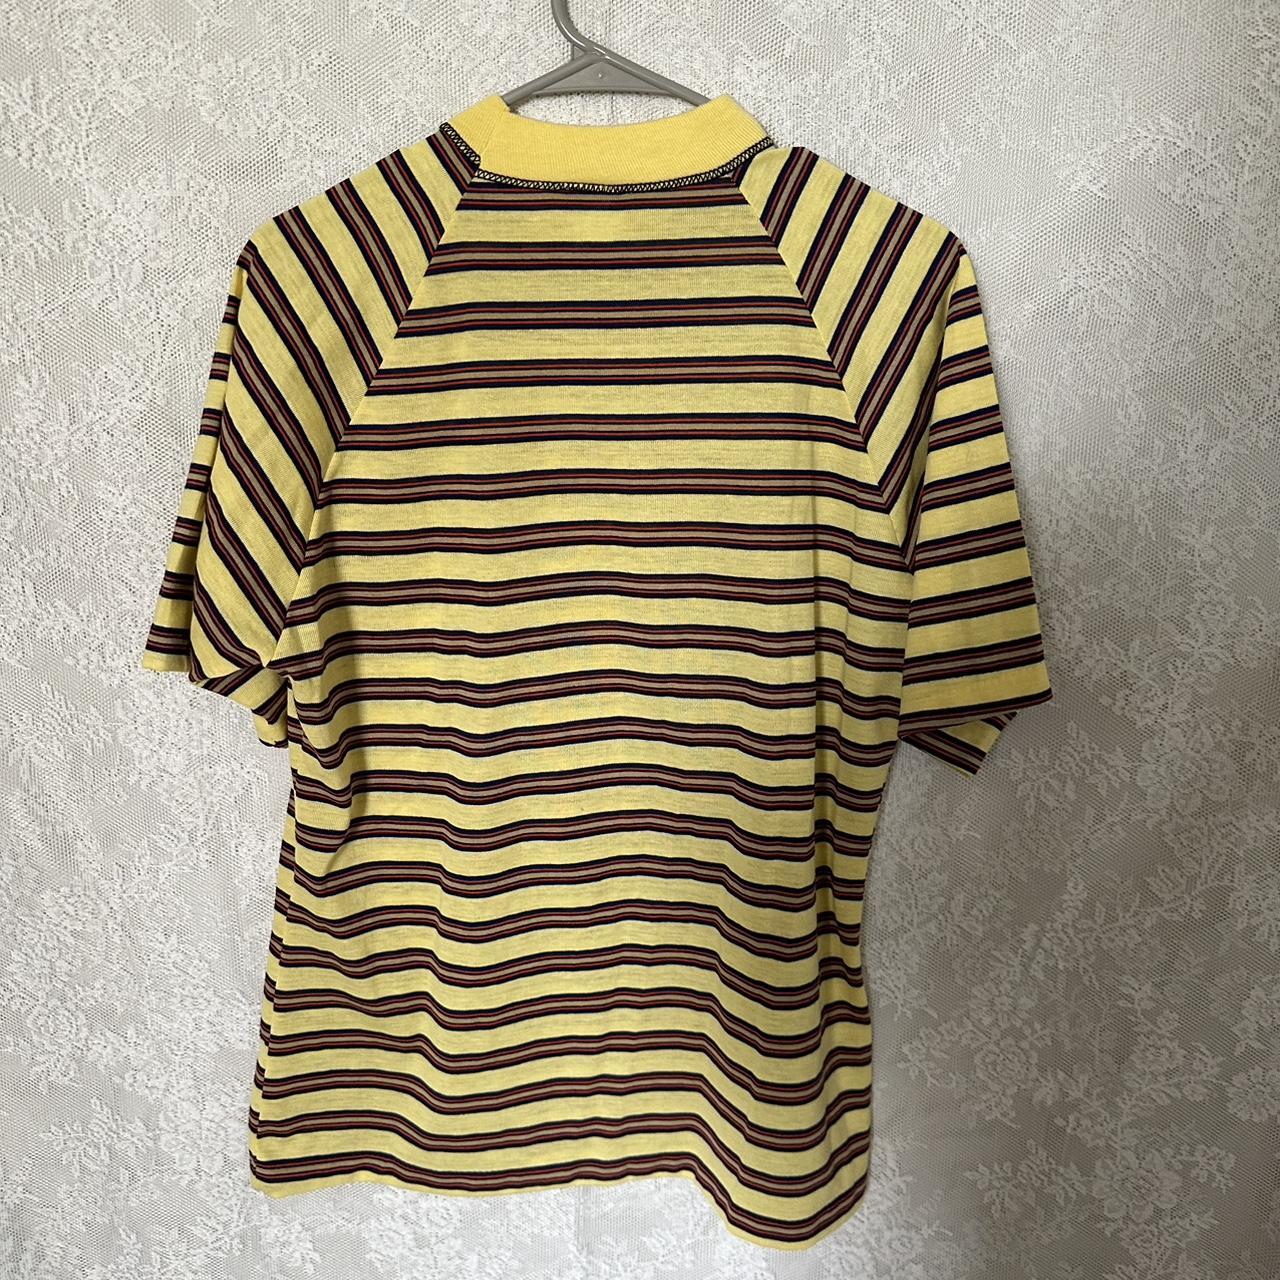 JCPenney Men's Yellow and Black T-shirt | Depop